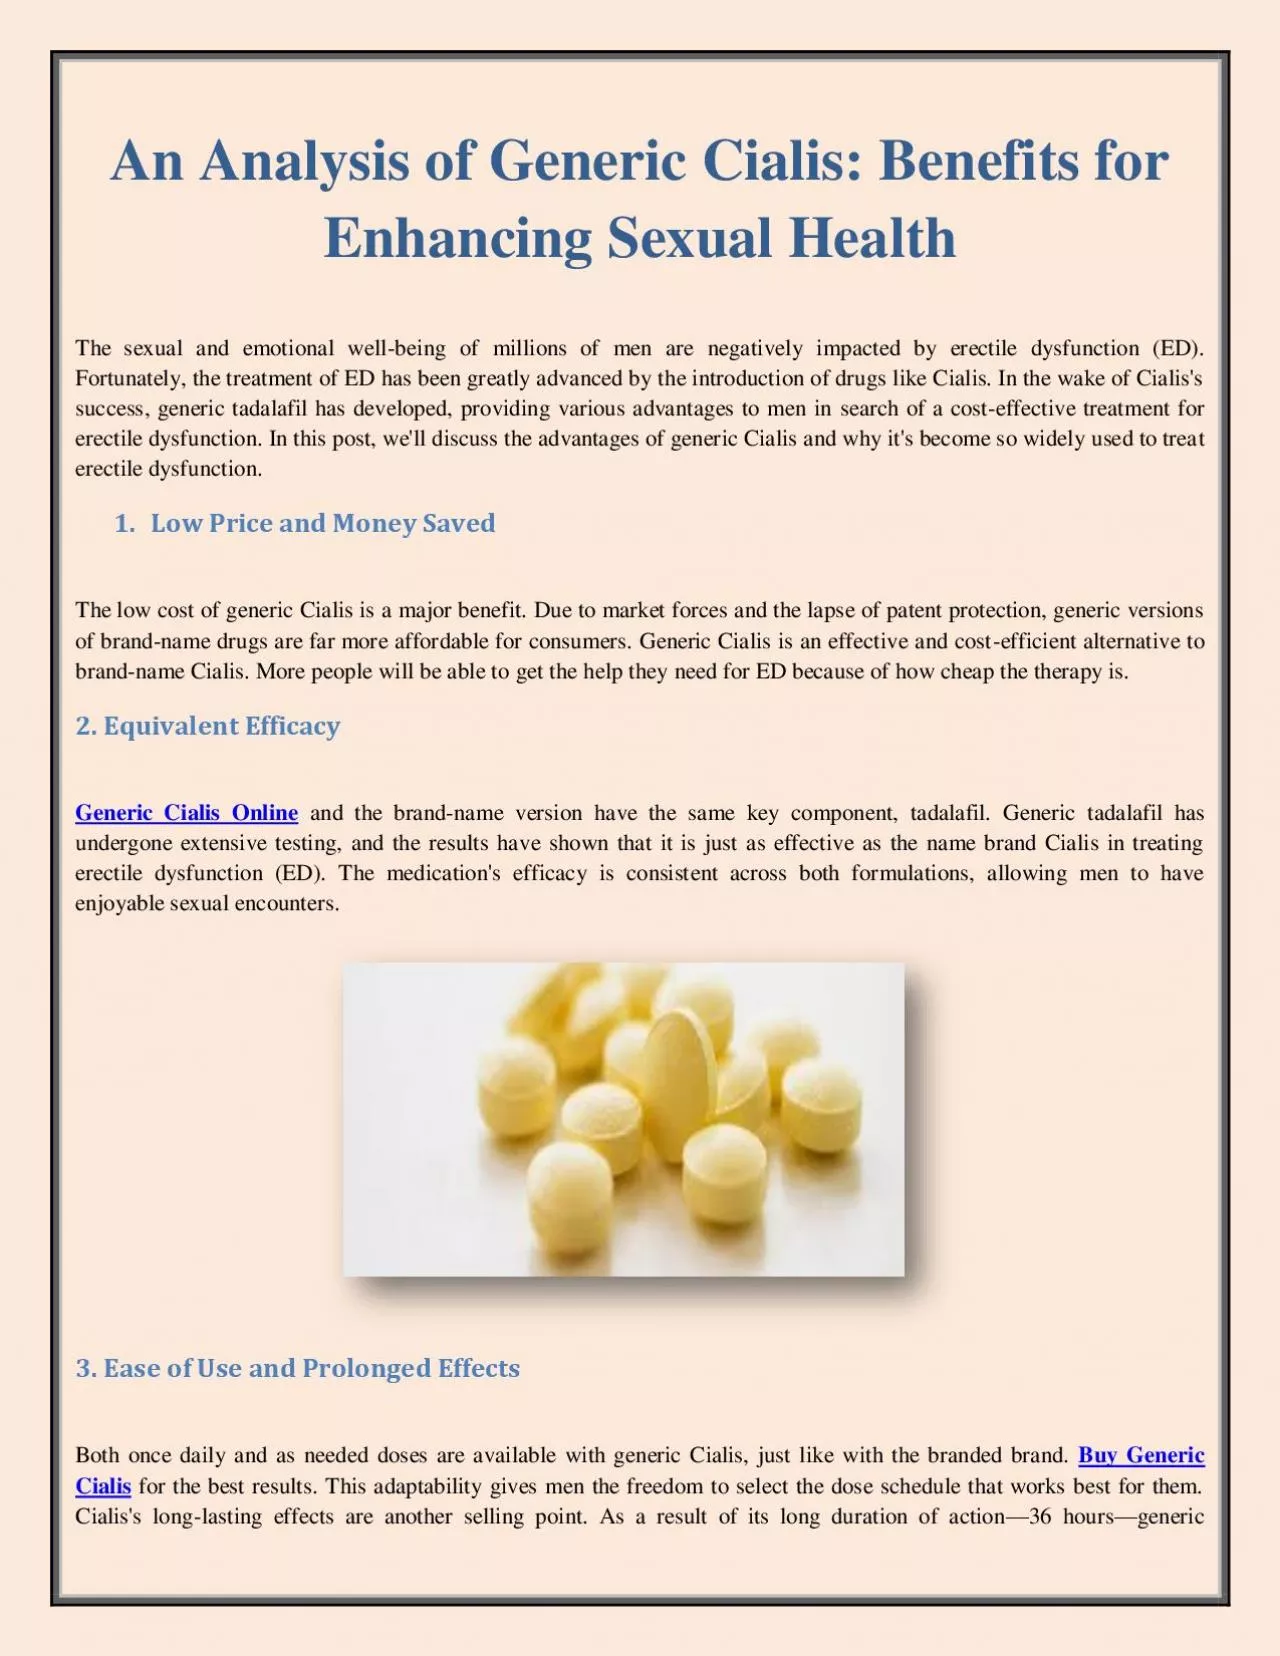 An Analysis of Generic Cialis: Benefits for Enhancing Sexual Health